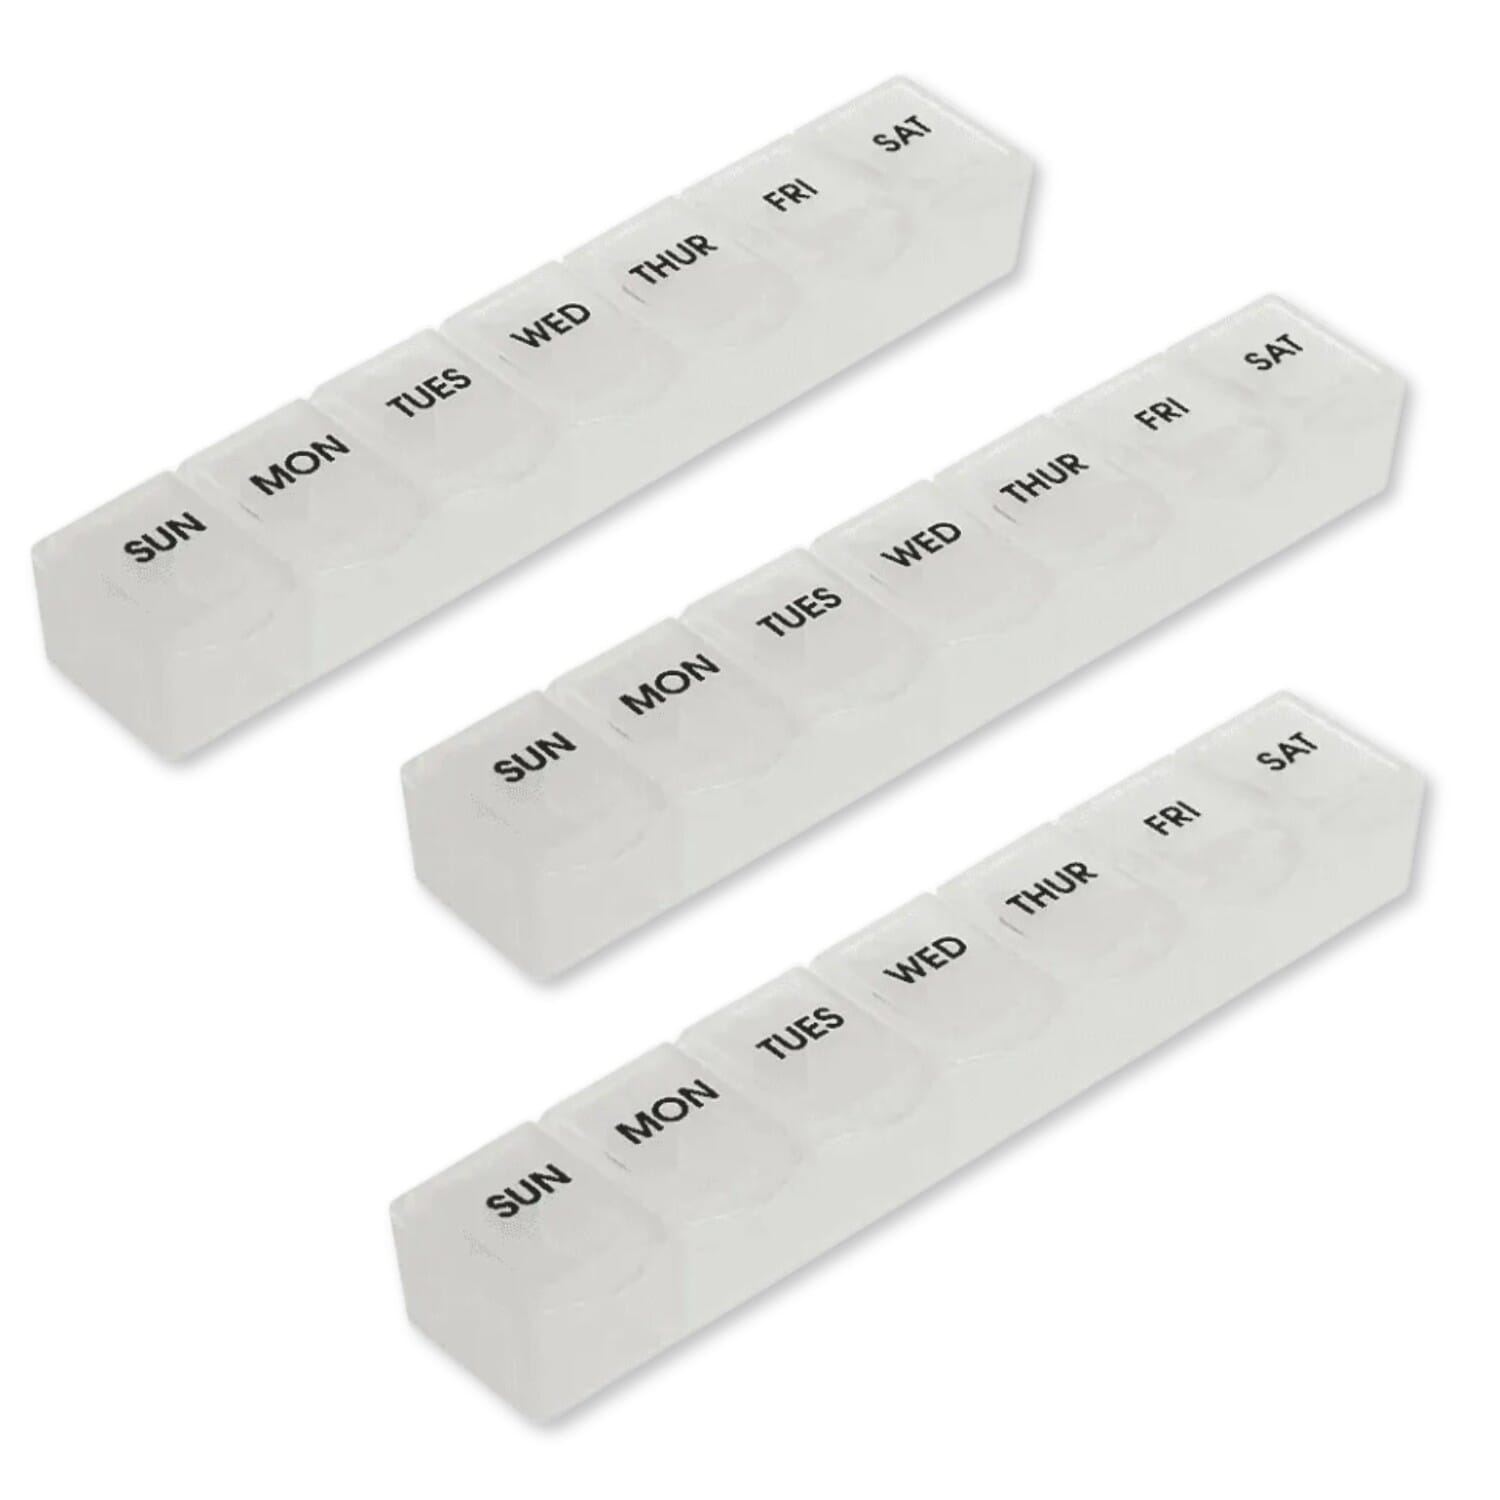 View 7 Day Pill Holder Pack of 3 information